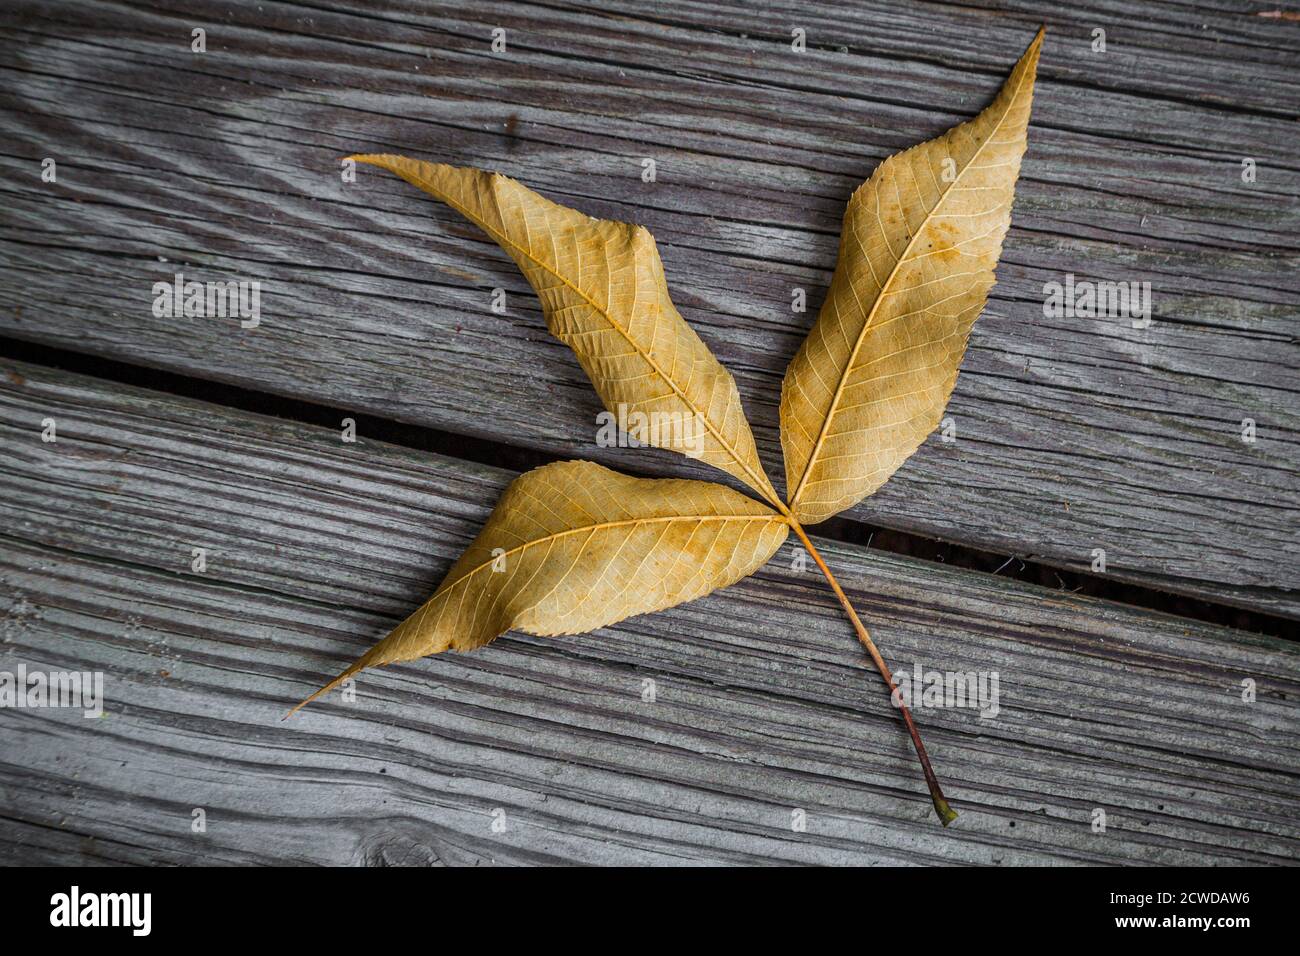 Fallen leaf from hickory tree on a weathered wooden deck Stock Photo